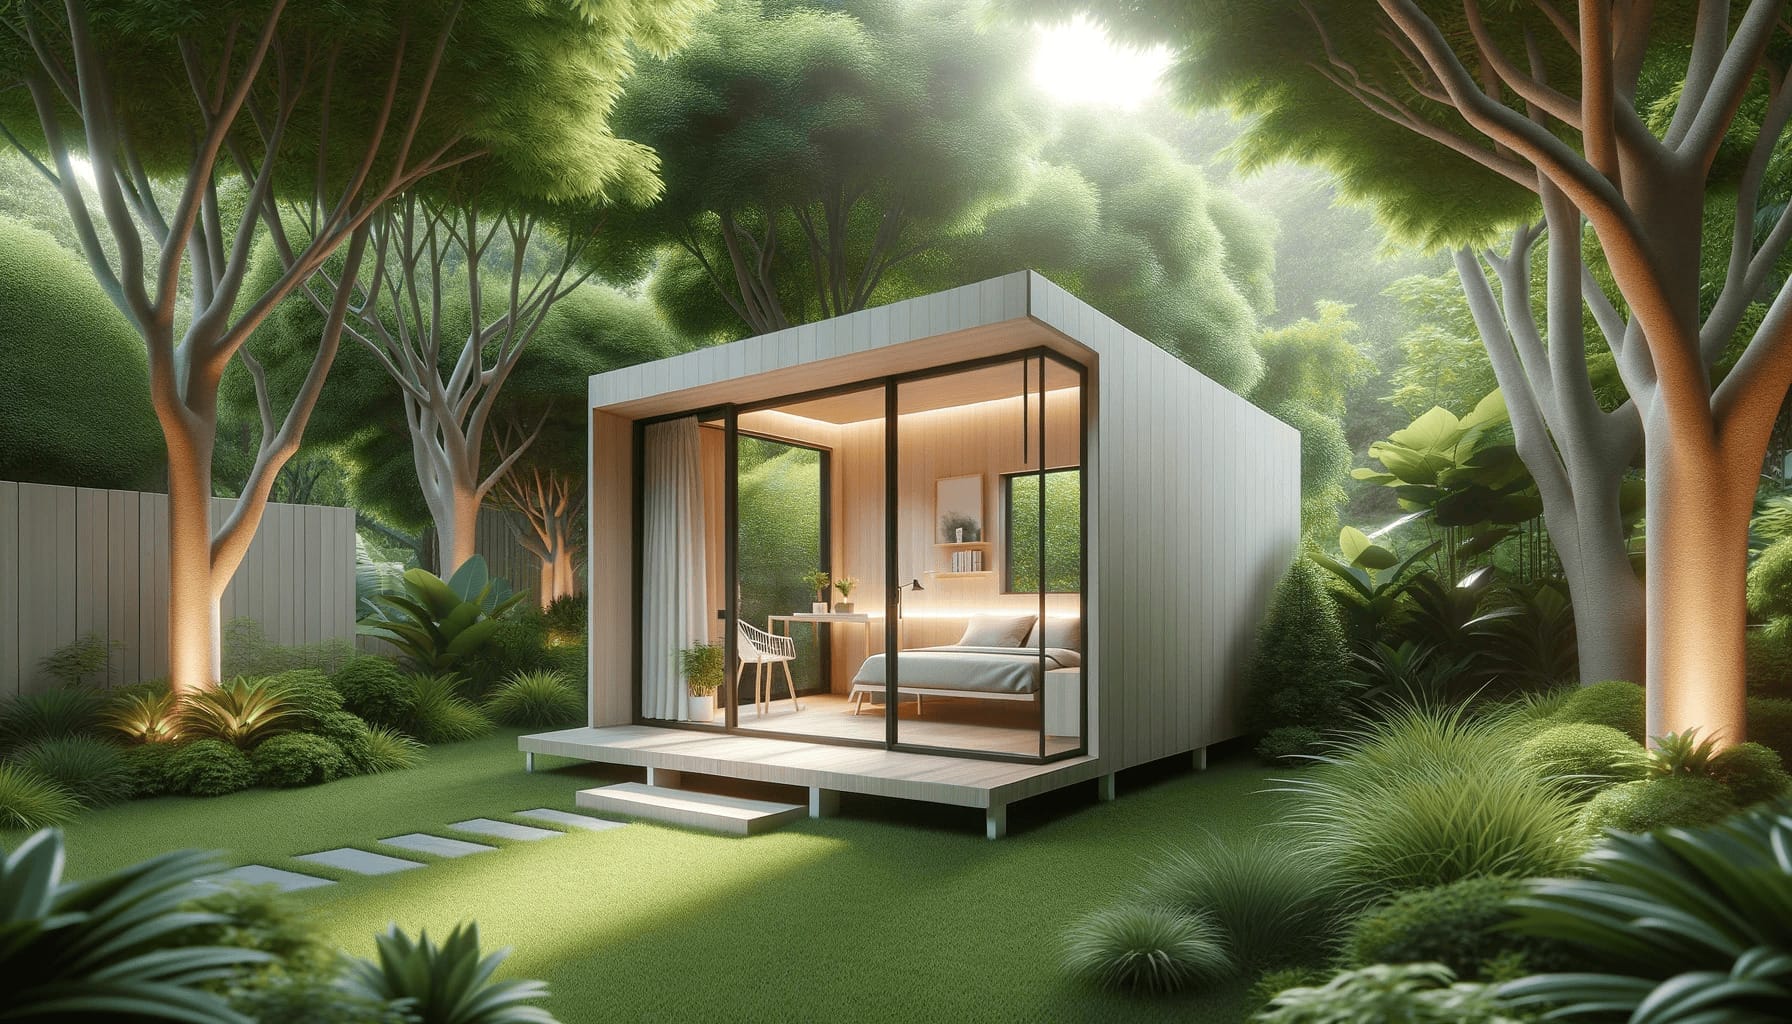 DALL·E 2023 10 19 09.13.15 Photo of a sleek light duty cabin placed in a peaceful garden setting. The cabin showcases its minimalist design with natural light streaming through